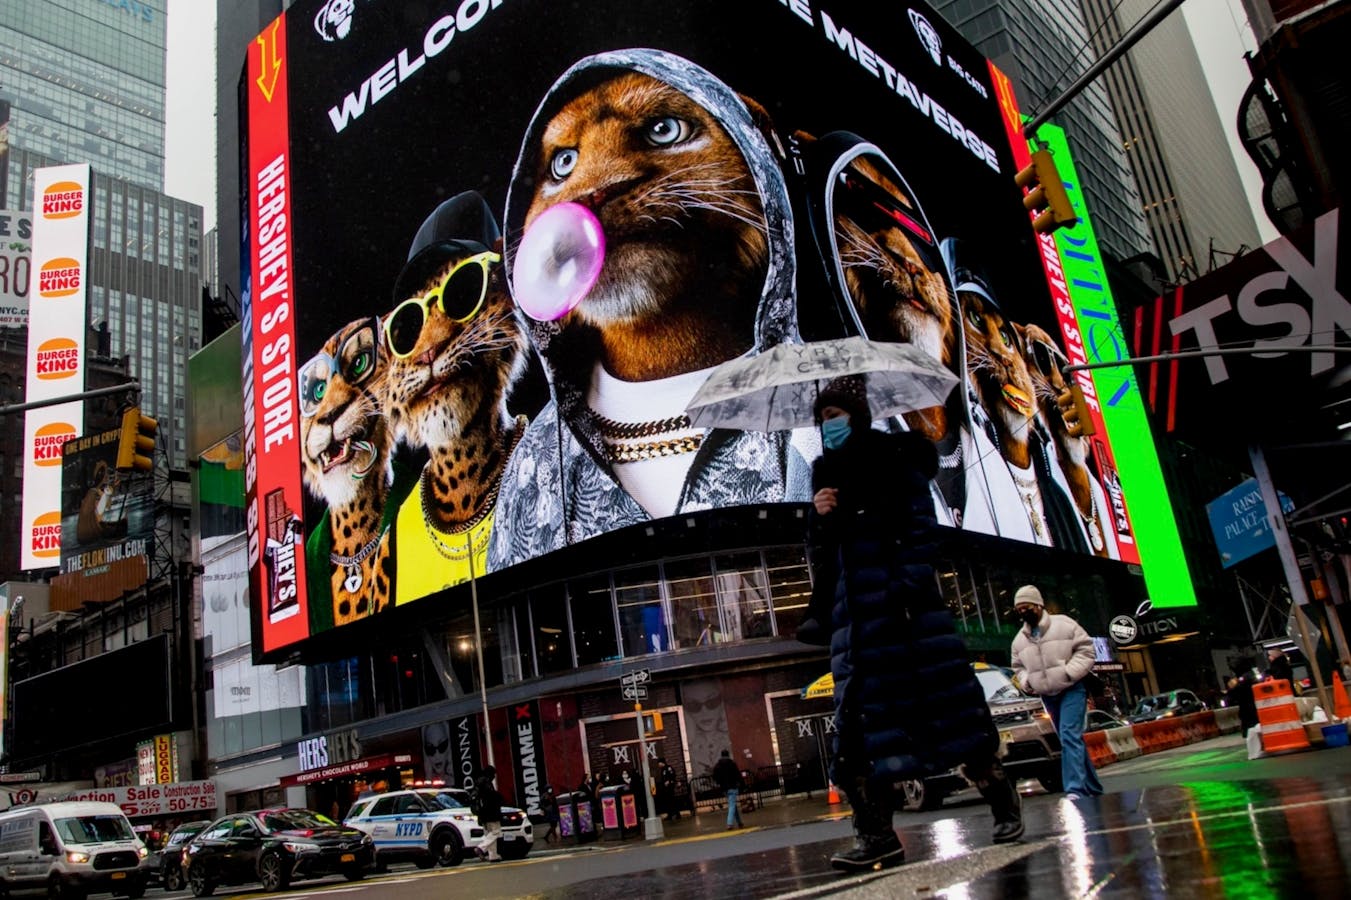 An advertisement for Big Cats NFT on an electronic billboard in Times Square, NY. Photo: Bloomberg